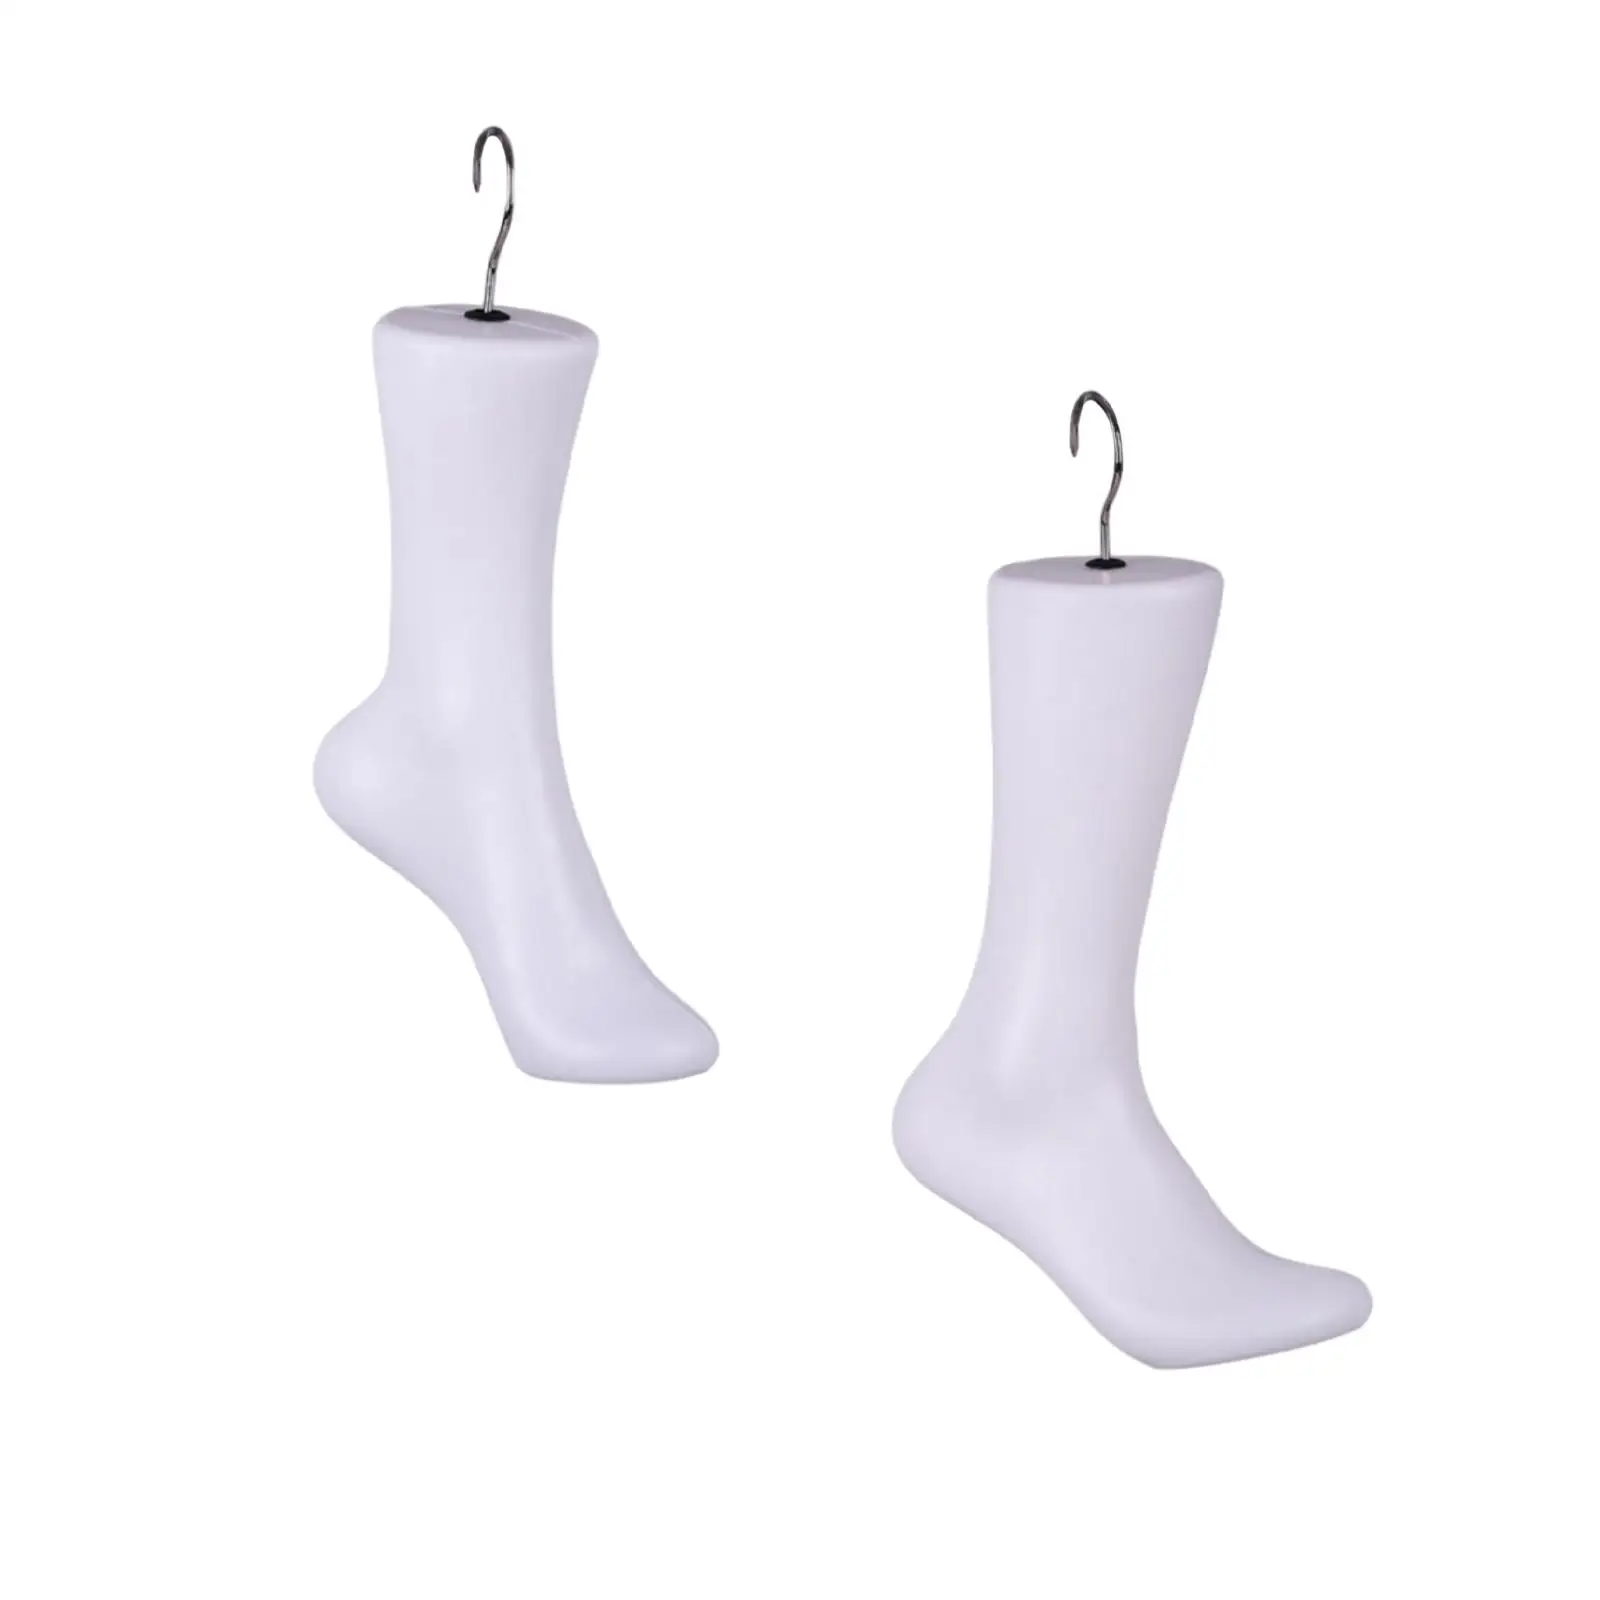 Sock Model Jewelry Display Stand Simulation Foot Model Shoes Displays Model Foot Sock Display Model for Retail Shop Chains Socks